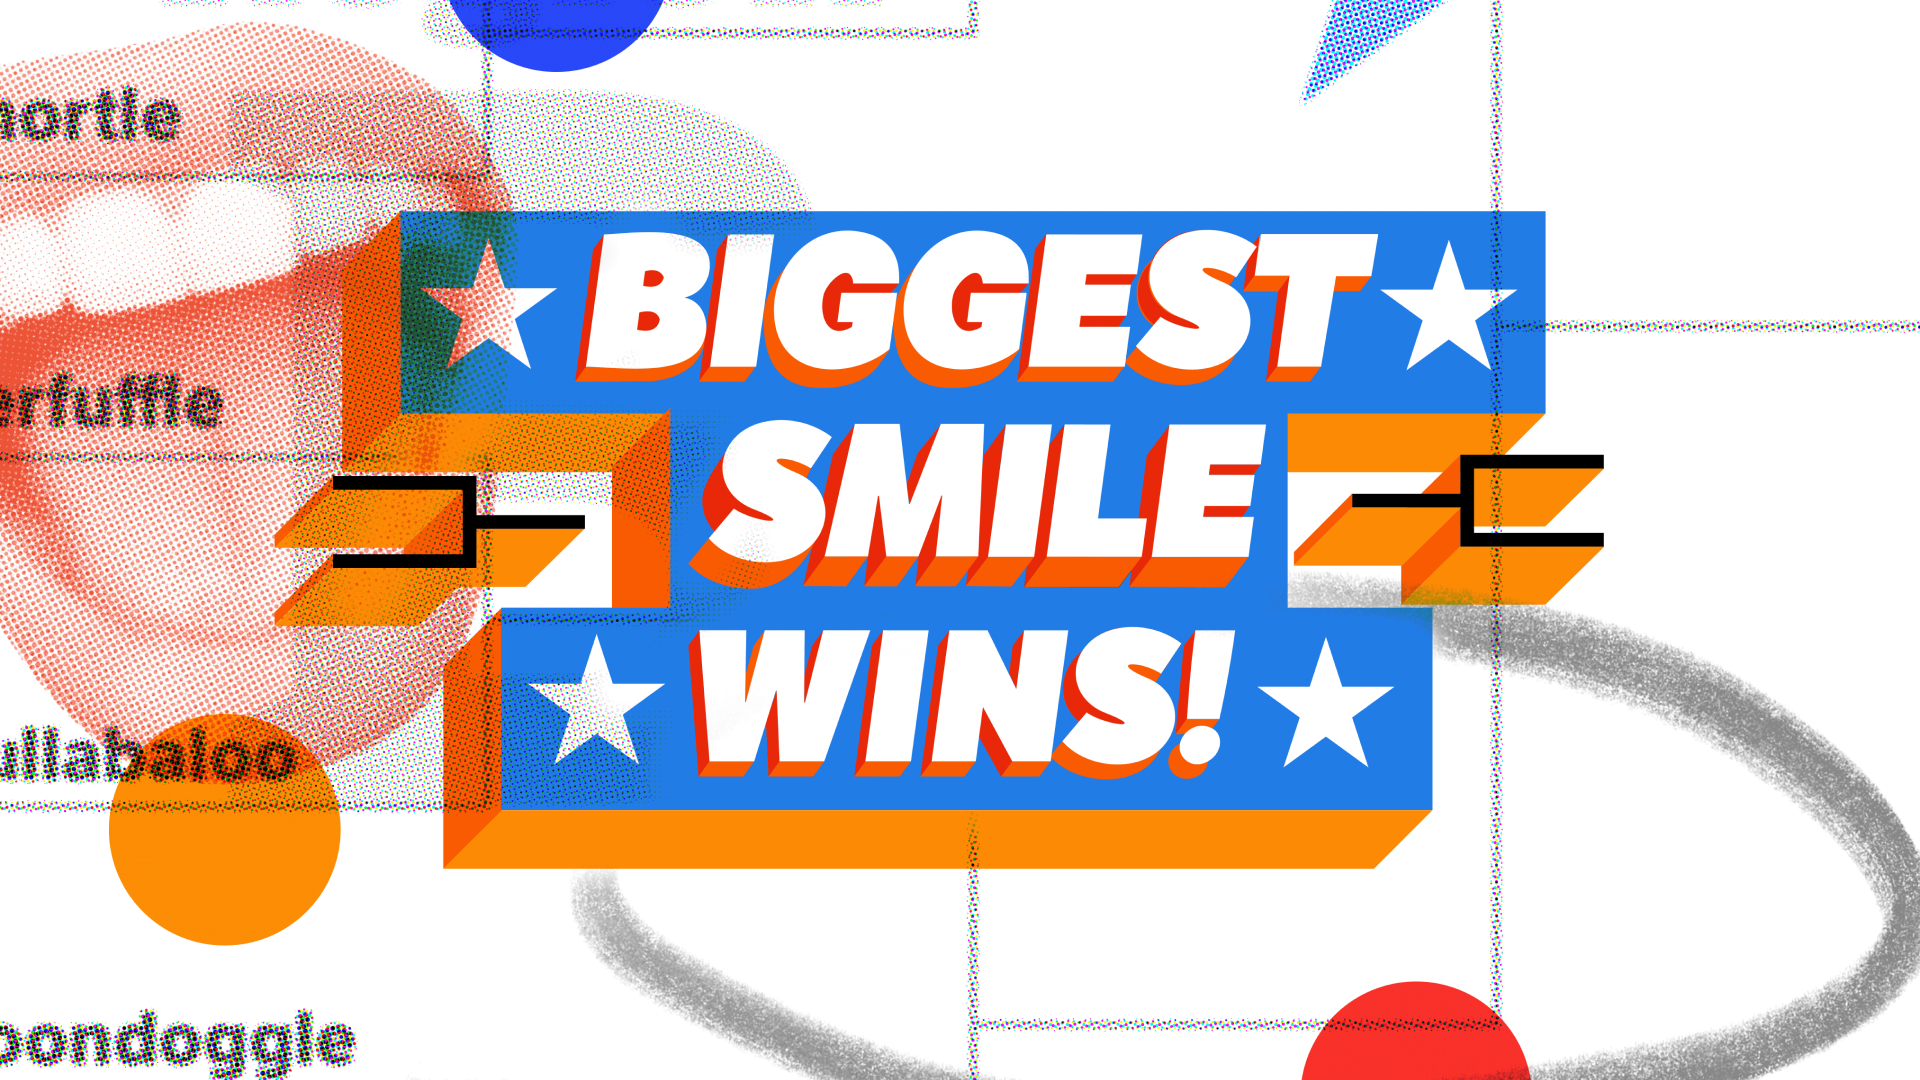 32 Of The Silliest Words. 1 Bracket. Biggest Smile Wins.